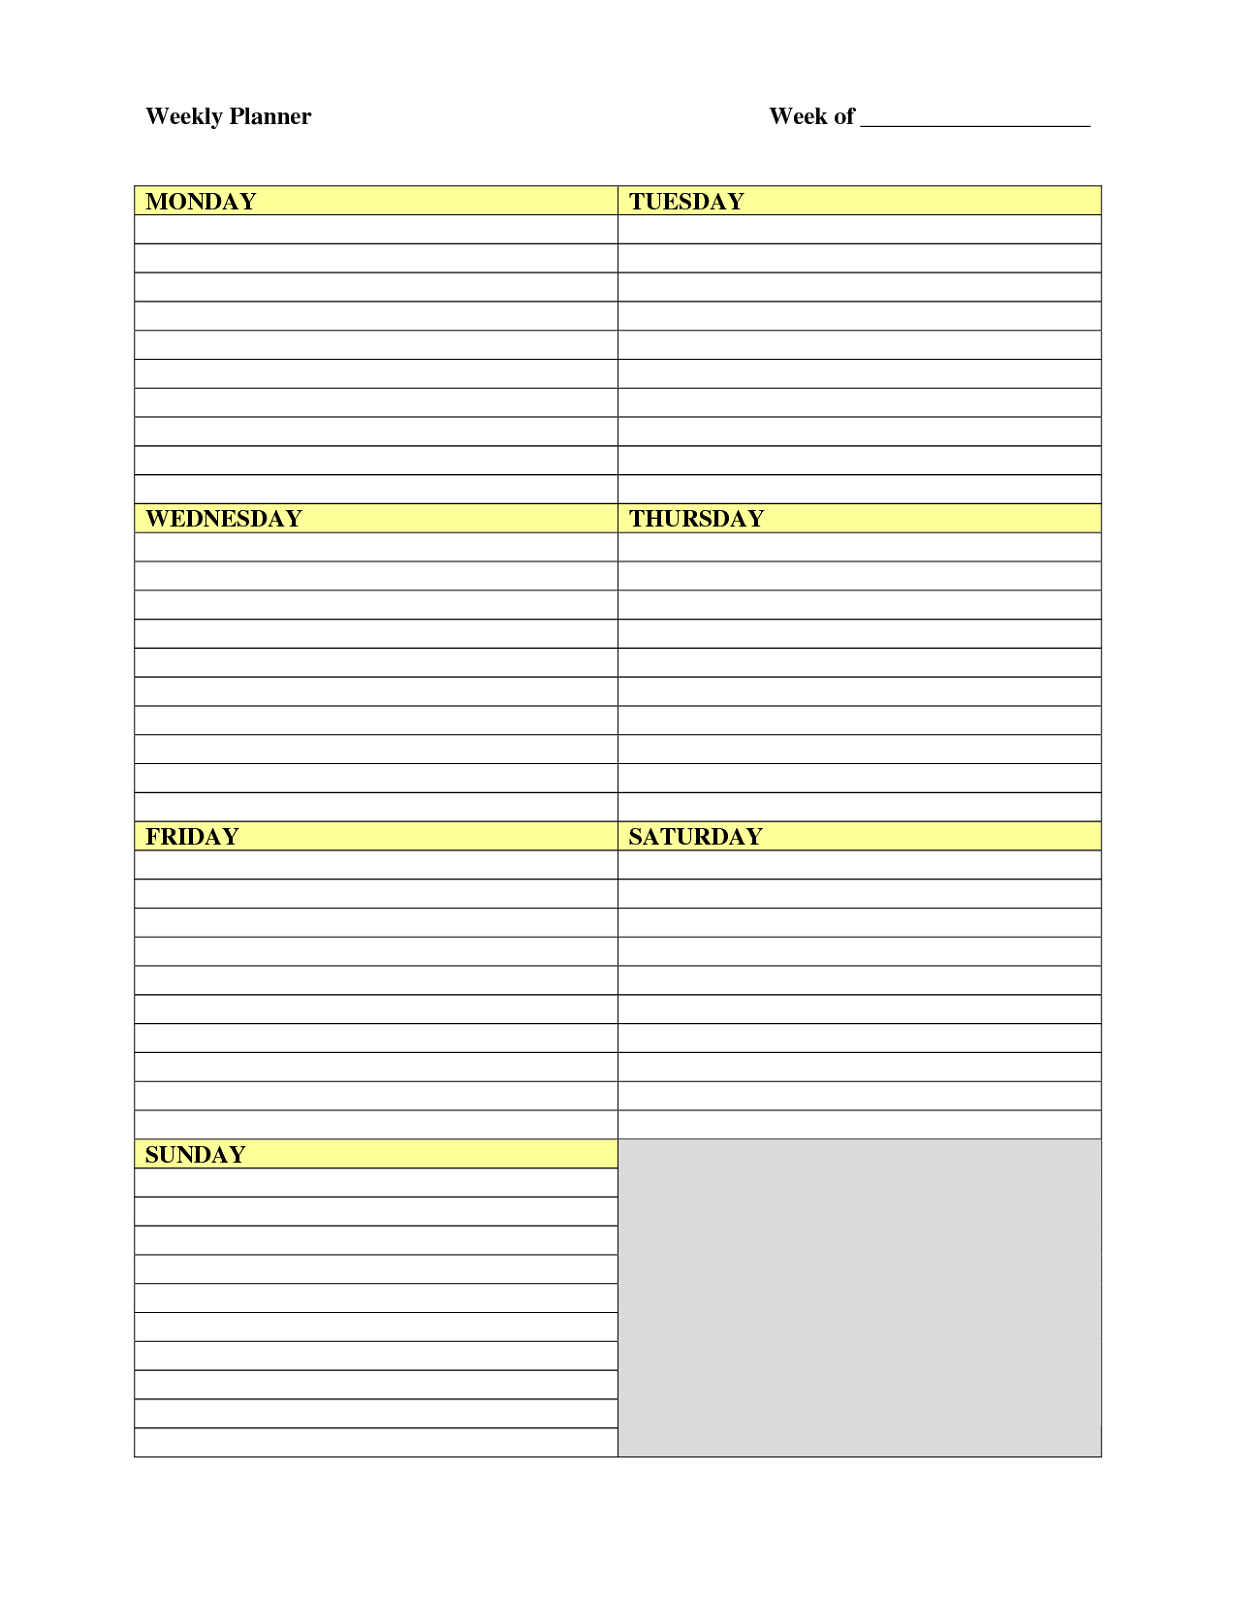 free-daily-planner-printable-sarah-titus-8-best-hourly-day-planner